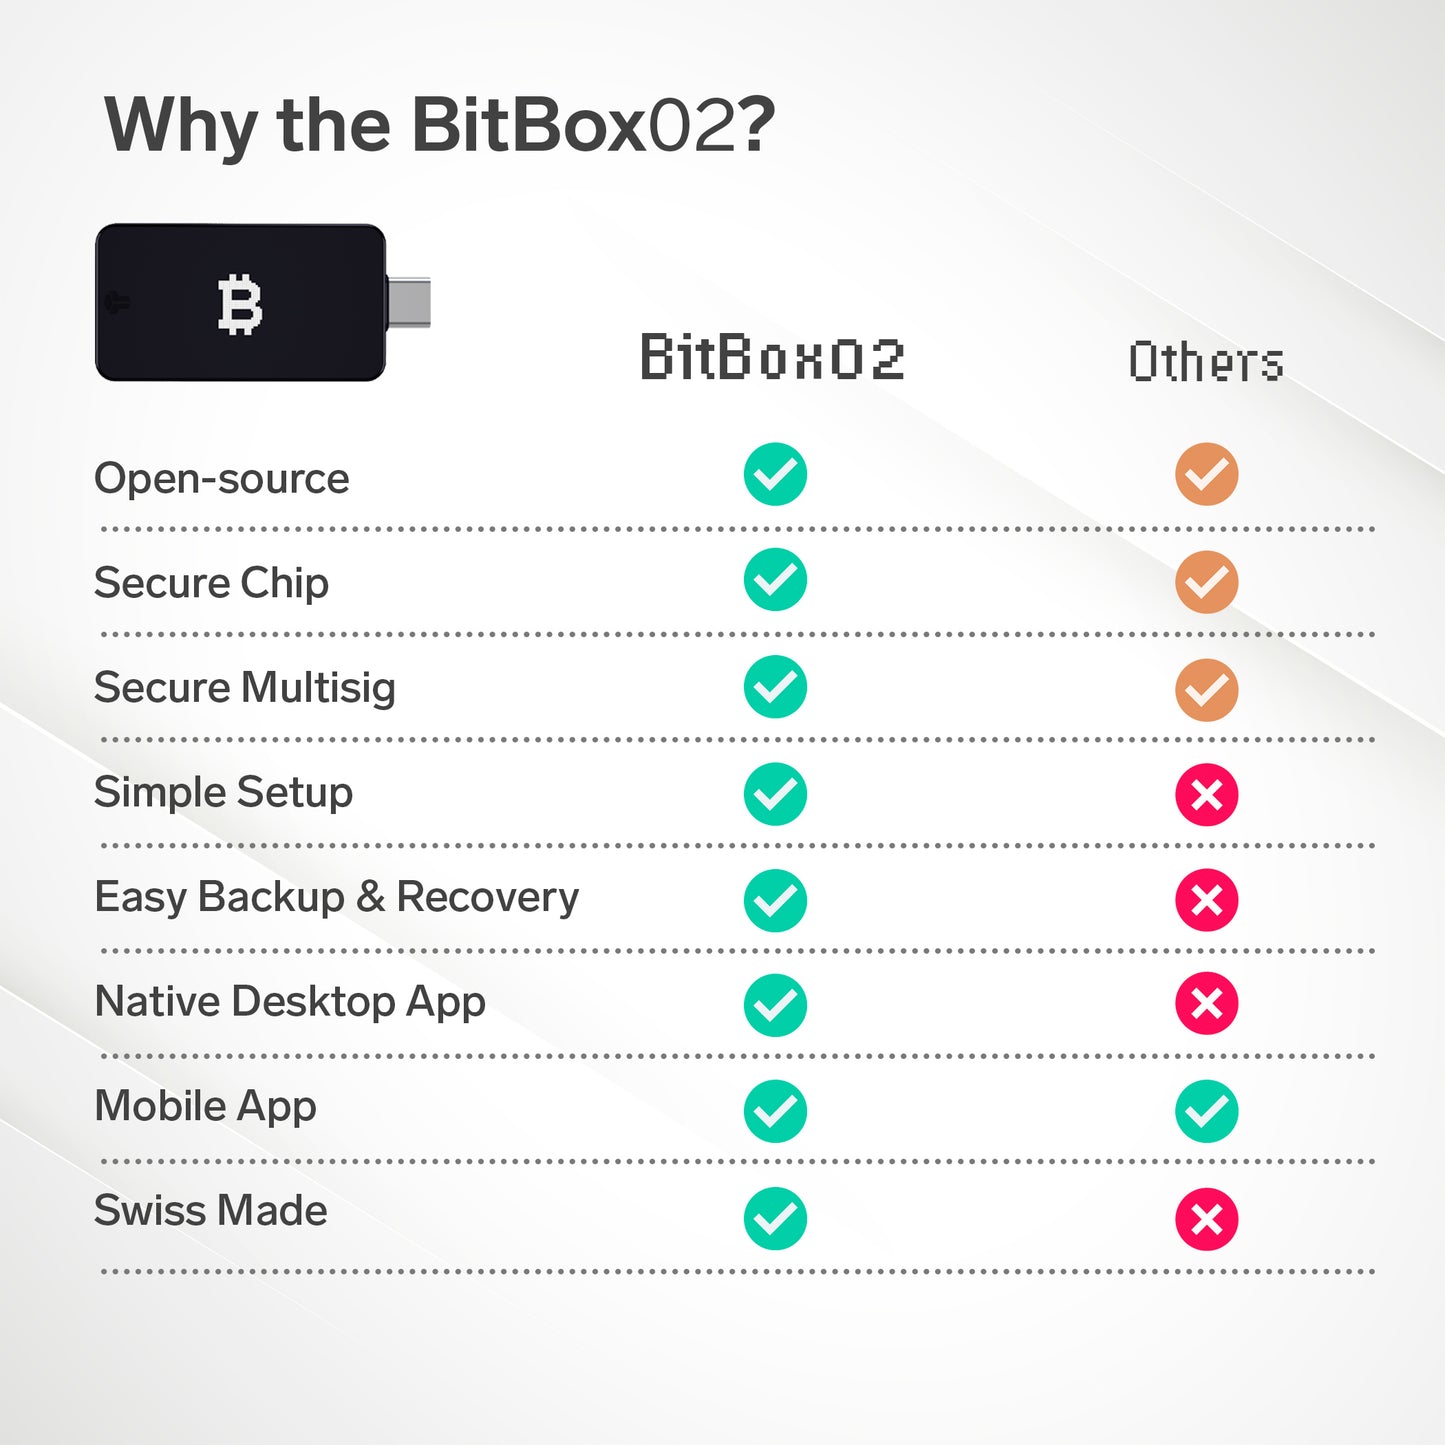 Bitbox02 (Bitcoin-only Edition)